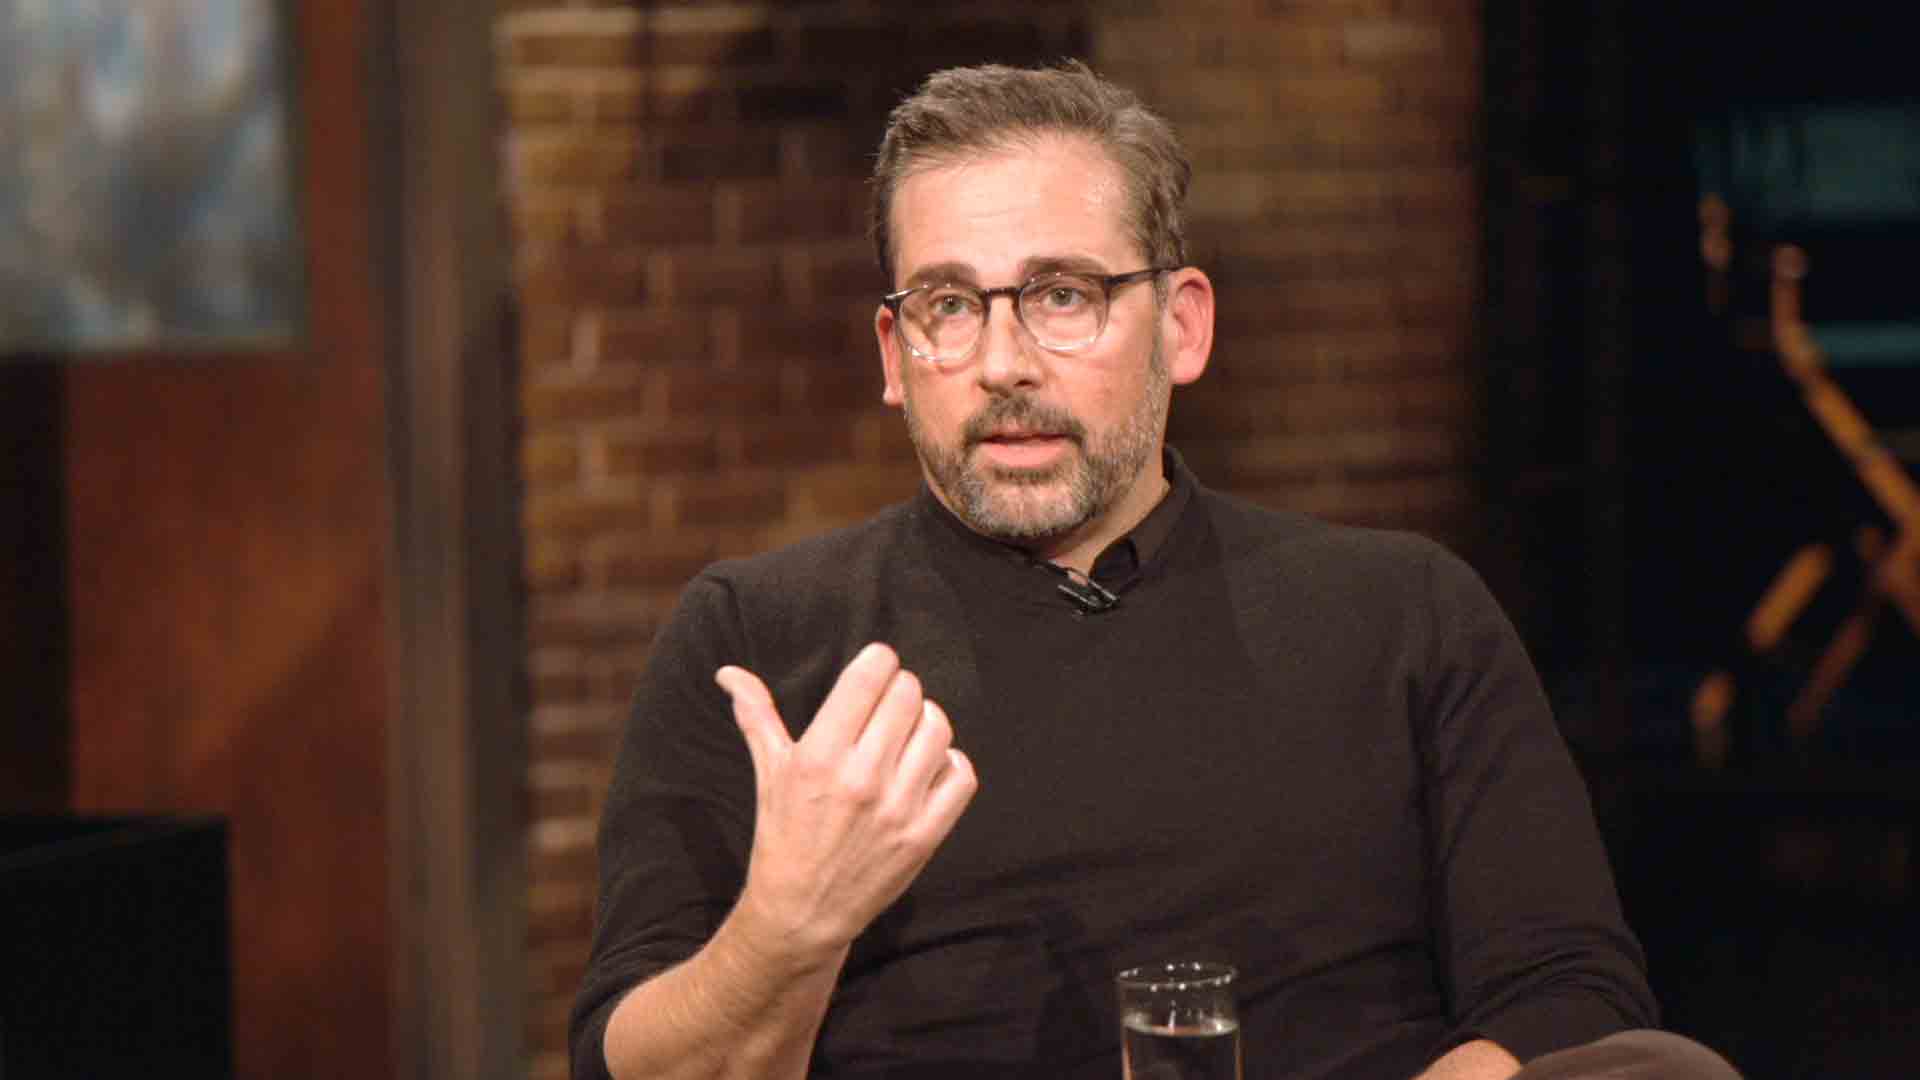 Watch Steve Carell on Always Playing Losers. Inside the Actors